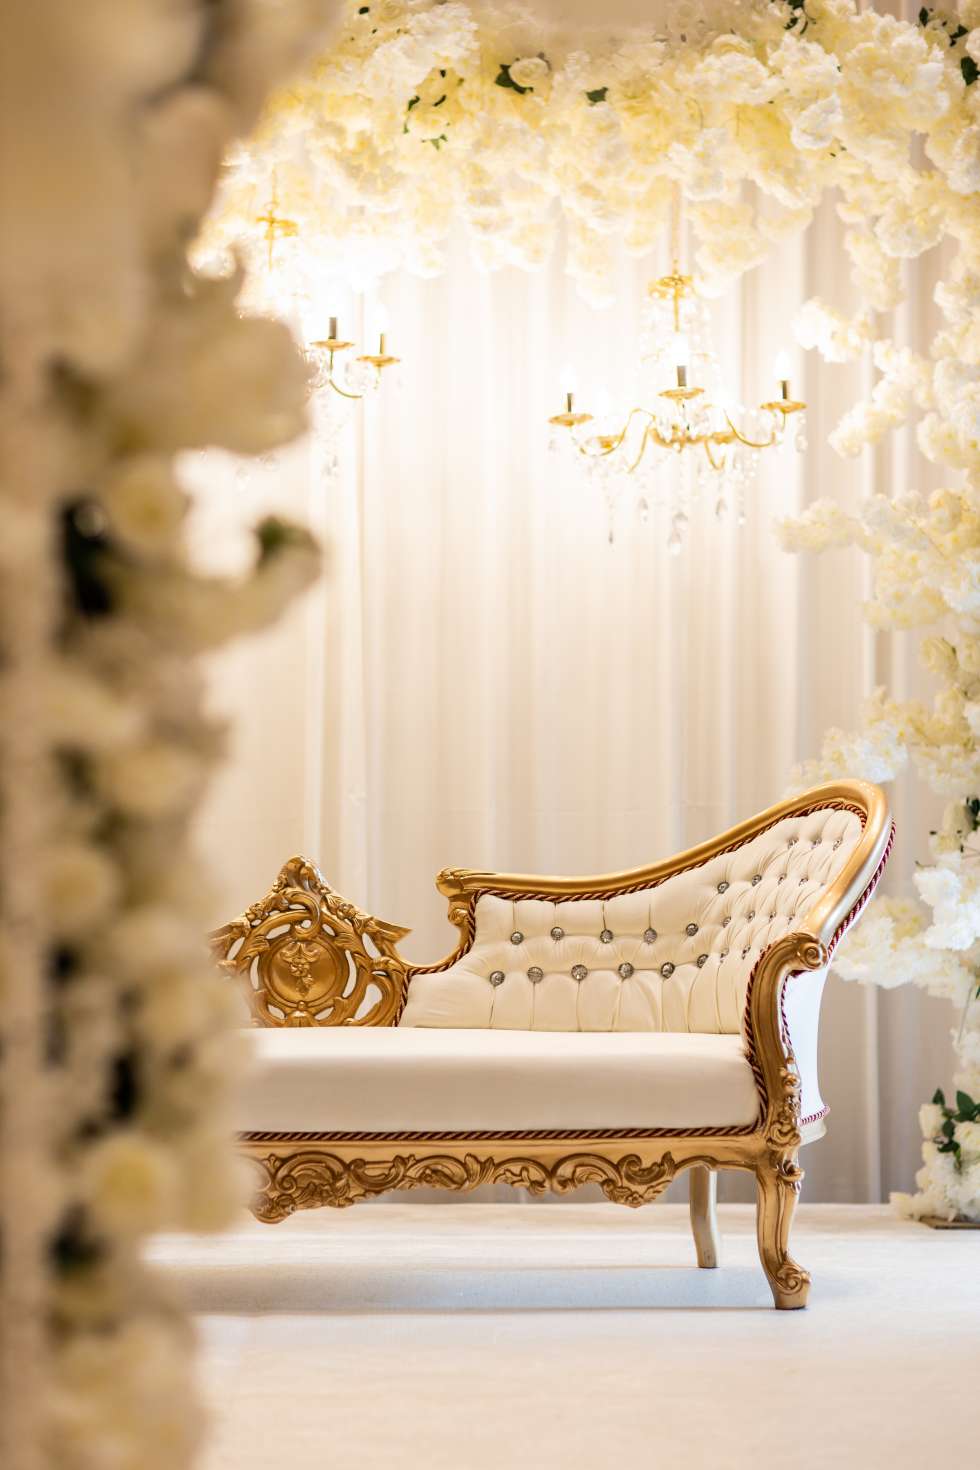  A White and Gold Fairytale Wedding in Dubai